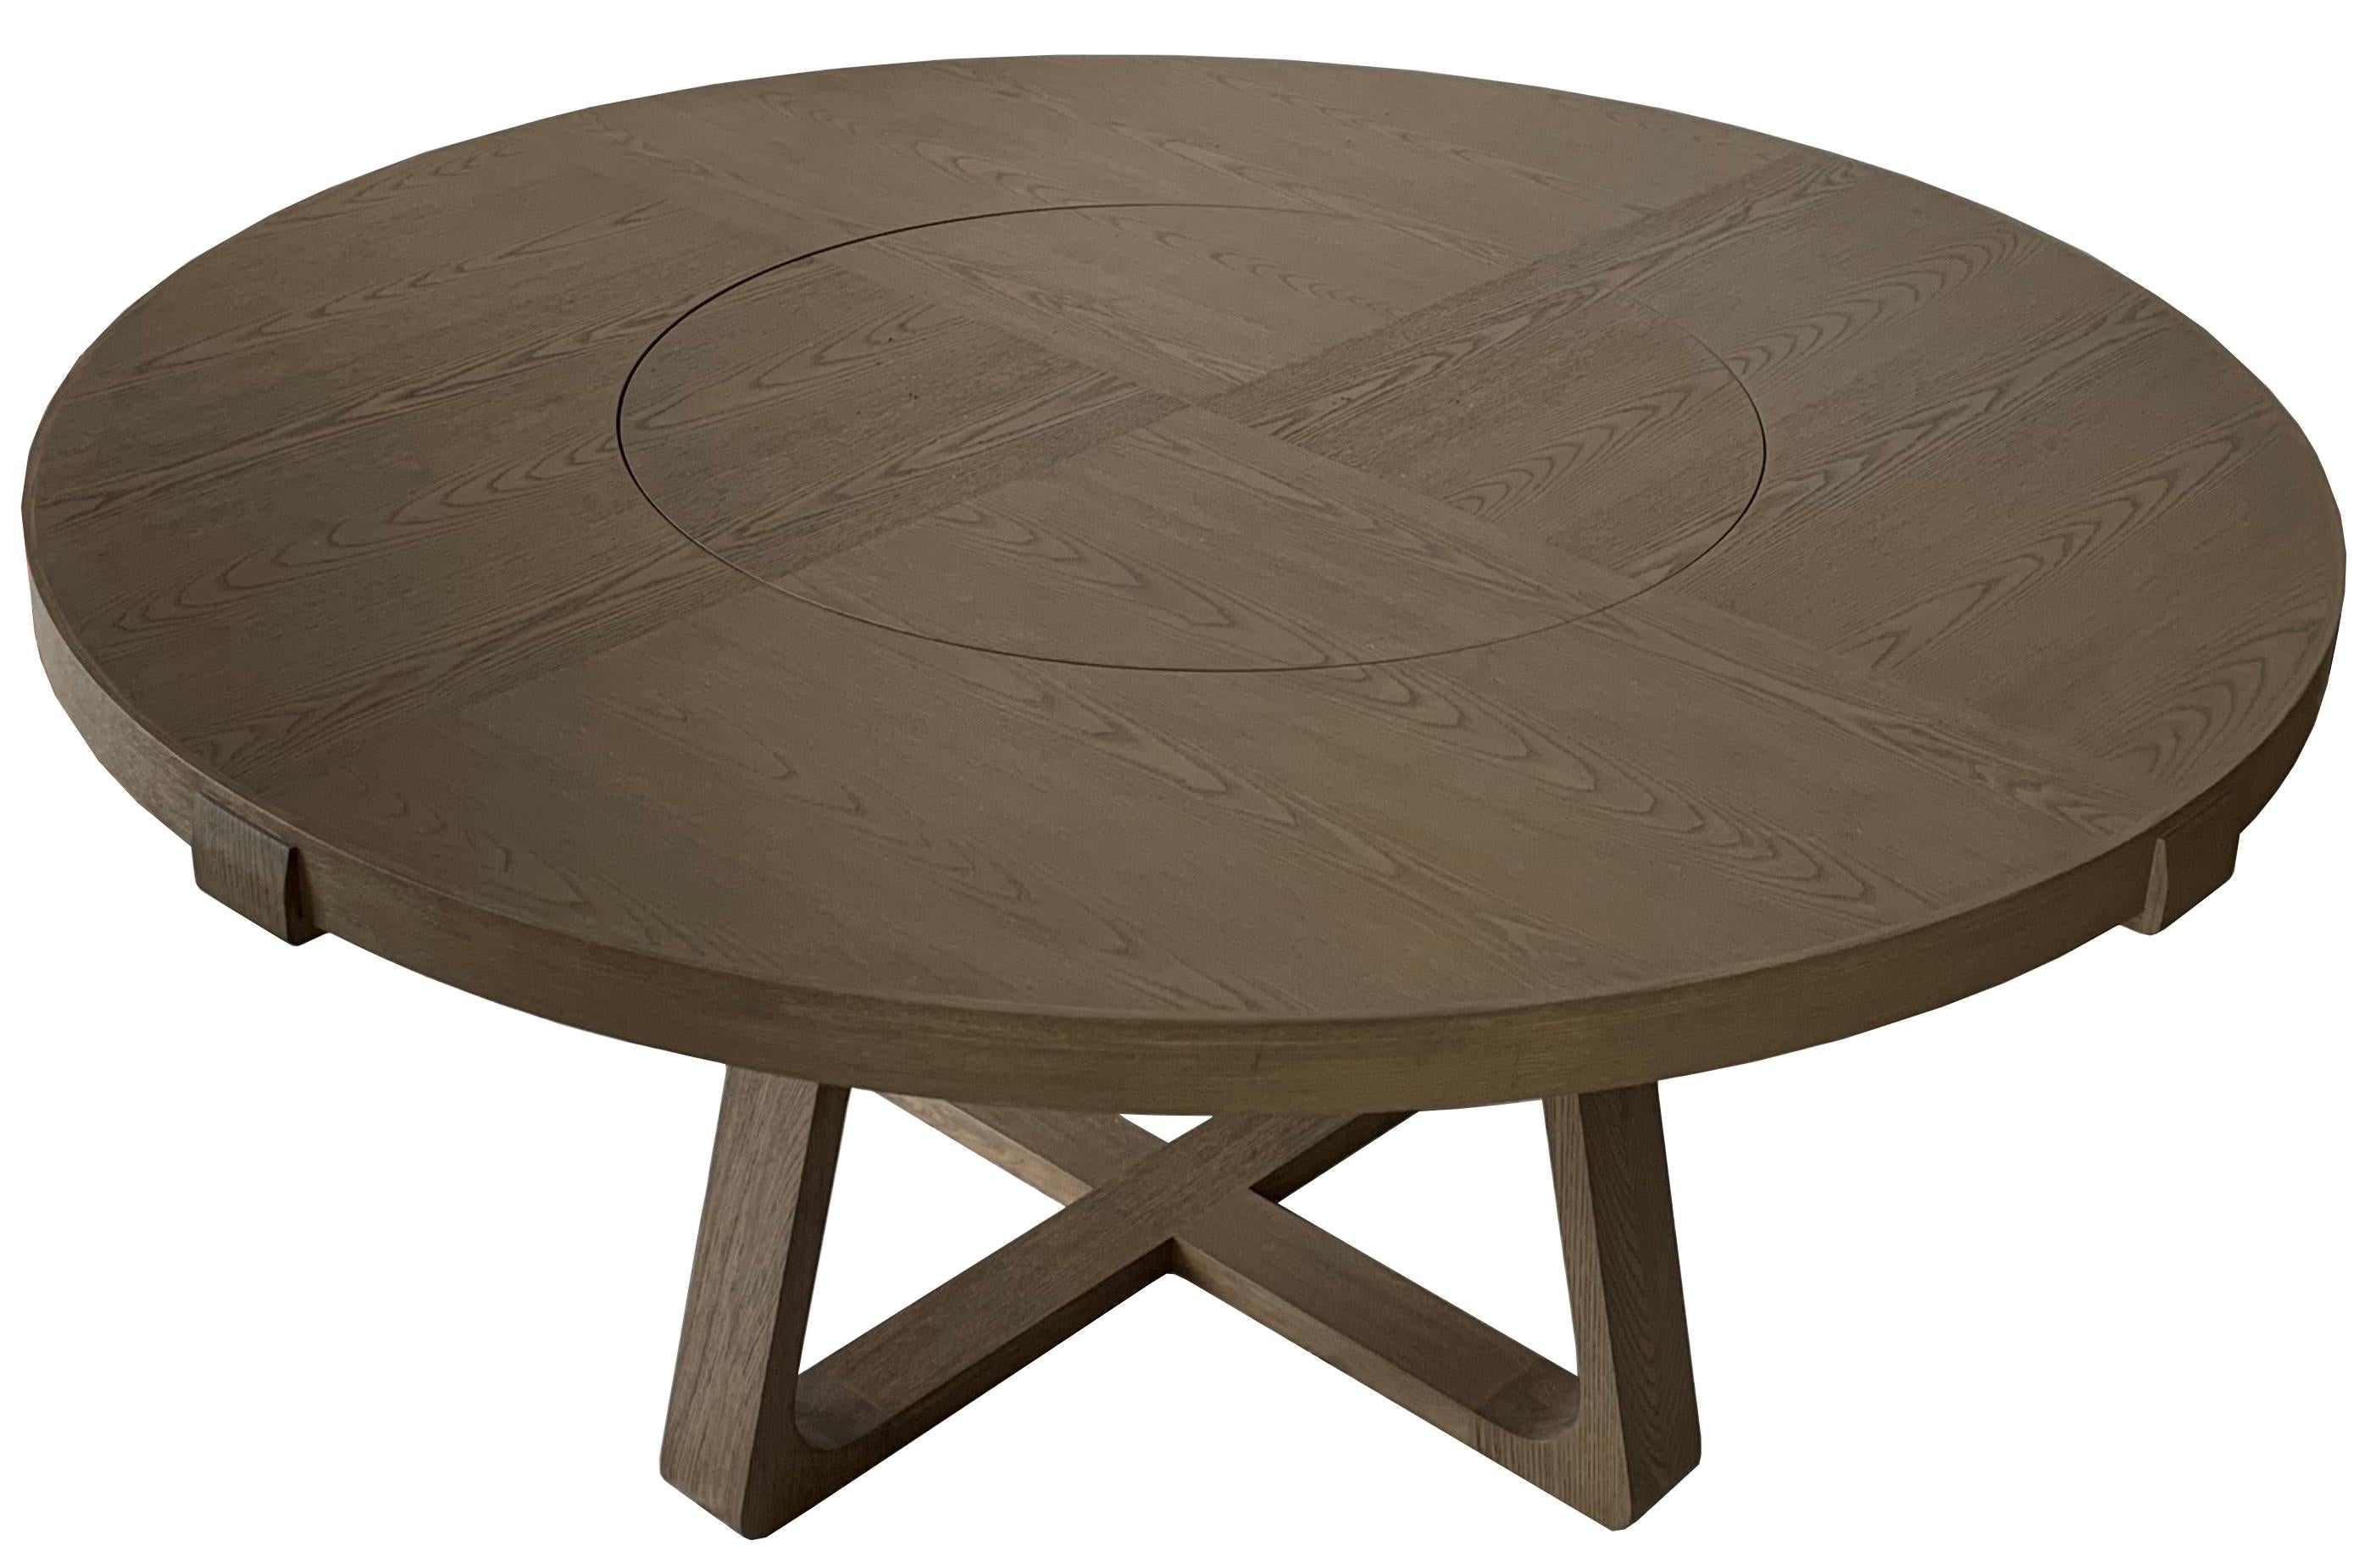 1)
Description: Round dining table with lazy susan
Code: F2W11CTL14
Color: Grey
Size: 140 Ø x 73 H cm
Material: Oak
Price: US$ 6,234 each
Qty: 1 piece
1stDibs Reference: LU5239218896032

2)
Description: Dining chair
Code: FCARC115RTL
Color: Grey and